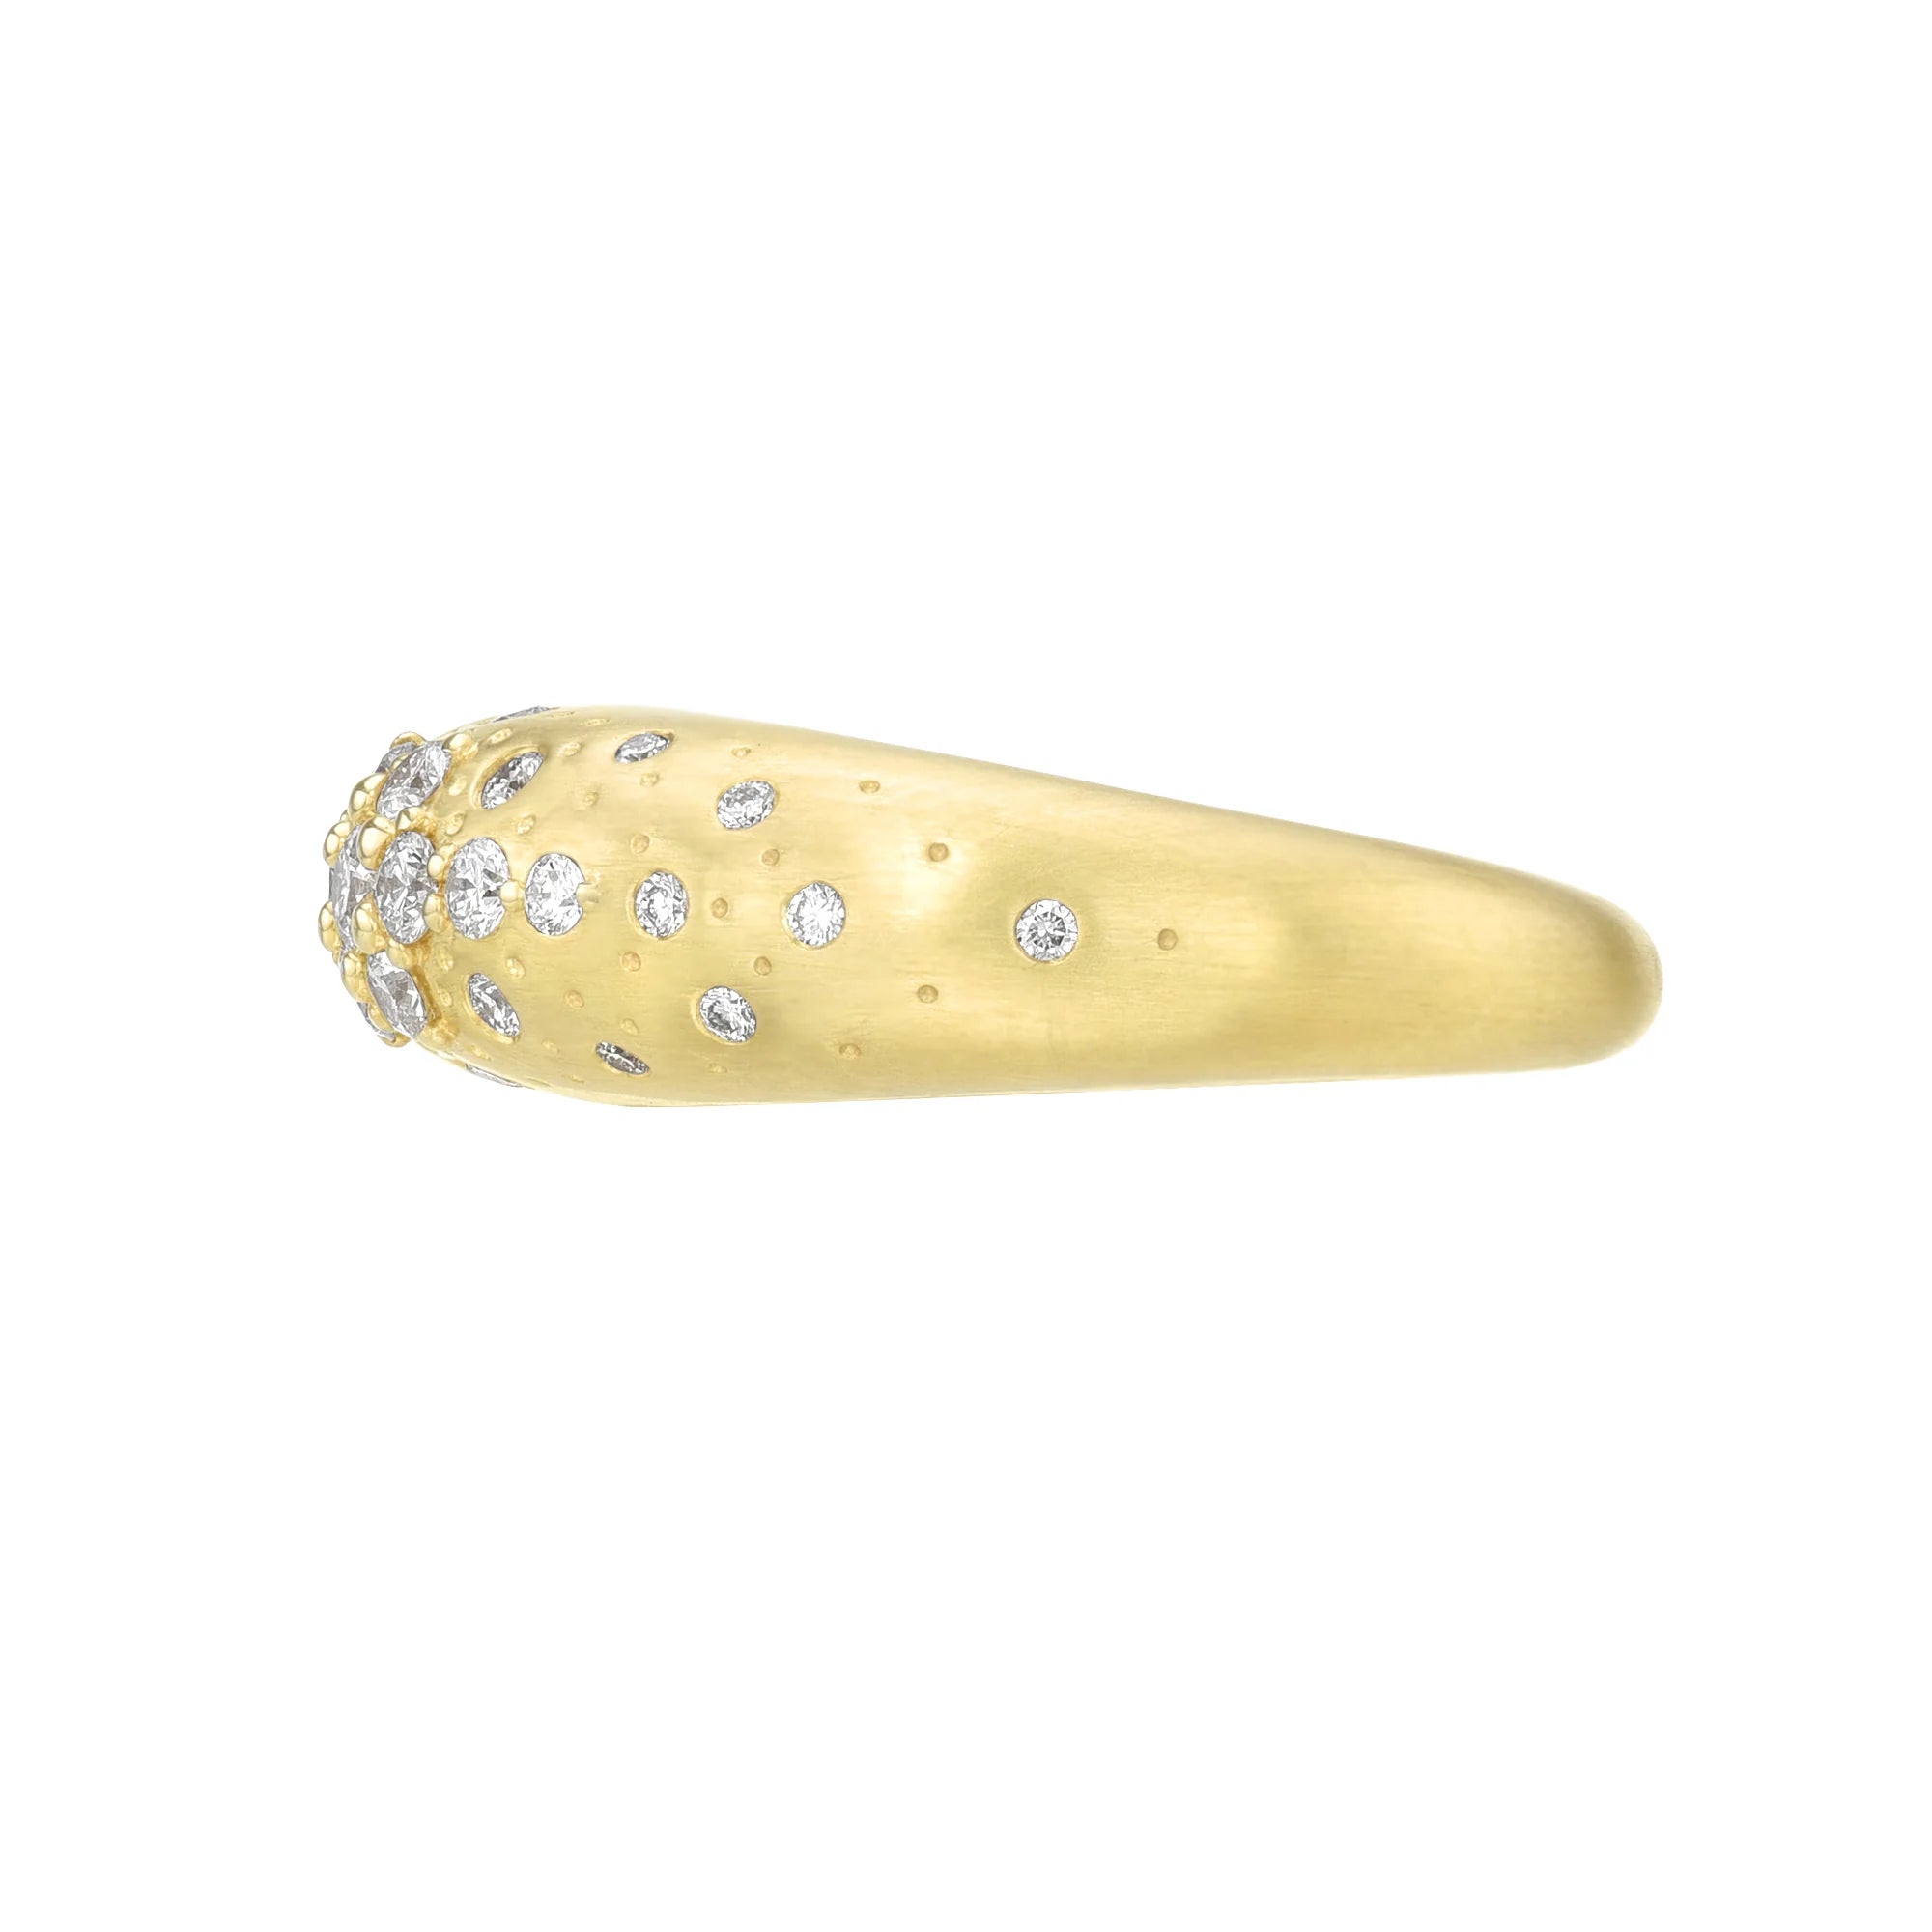 Diamond Stacking Ring by Meredith Young available at Talisman Collection Fine Jewelers in El Dorado Hills, CA and online. This Diamond Stacking Ring is a shining example of refined craftsmanship. The satin finished 18k gold band showcases a graceful domed design, complemented by 0.5 carats of prong-set white diamonds. It's a lovely addition to your jewelry collection, adding timeless charm to any ensemble.